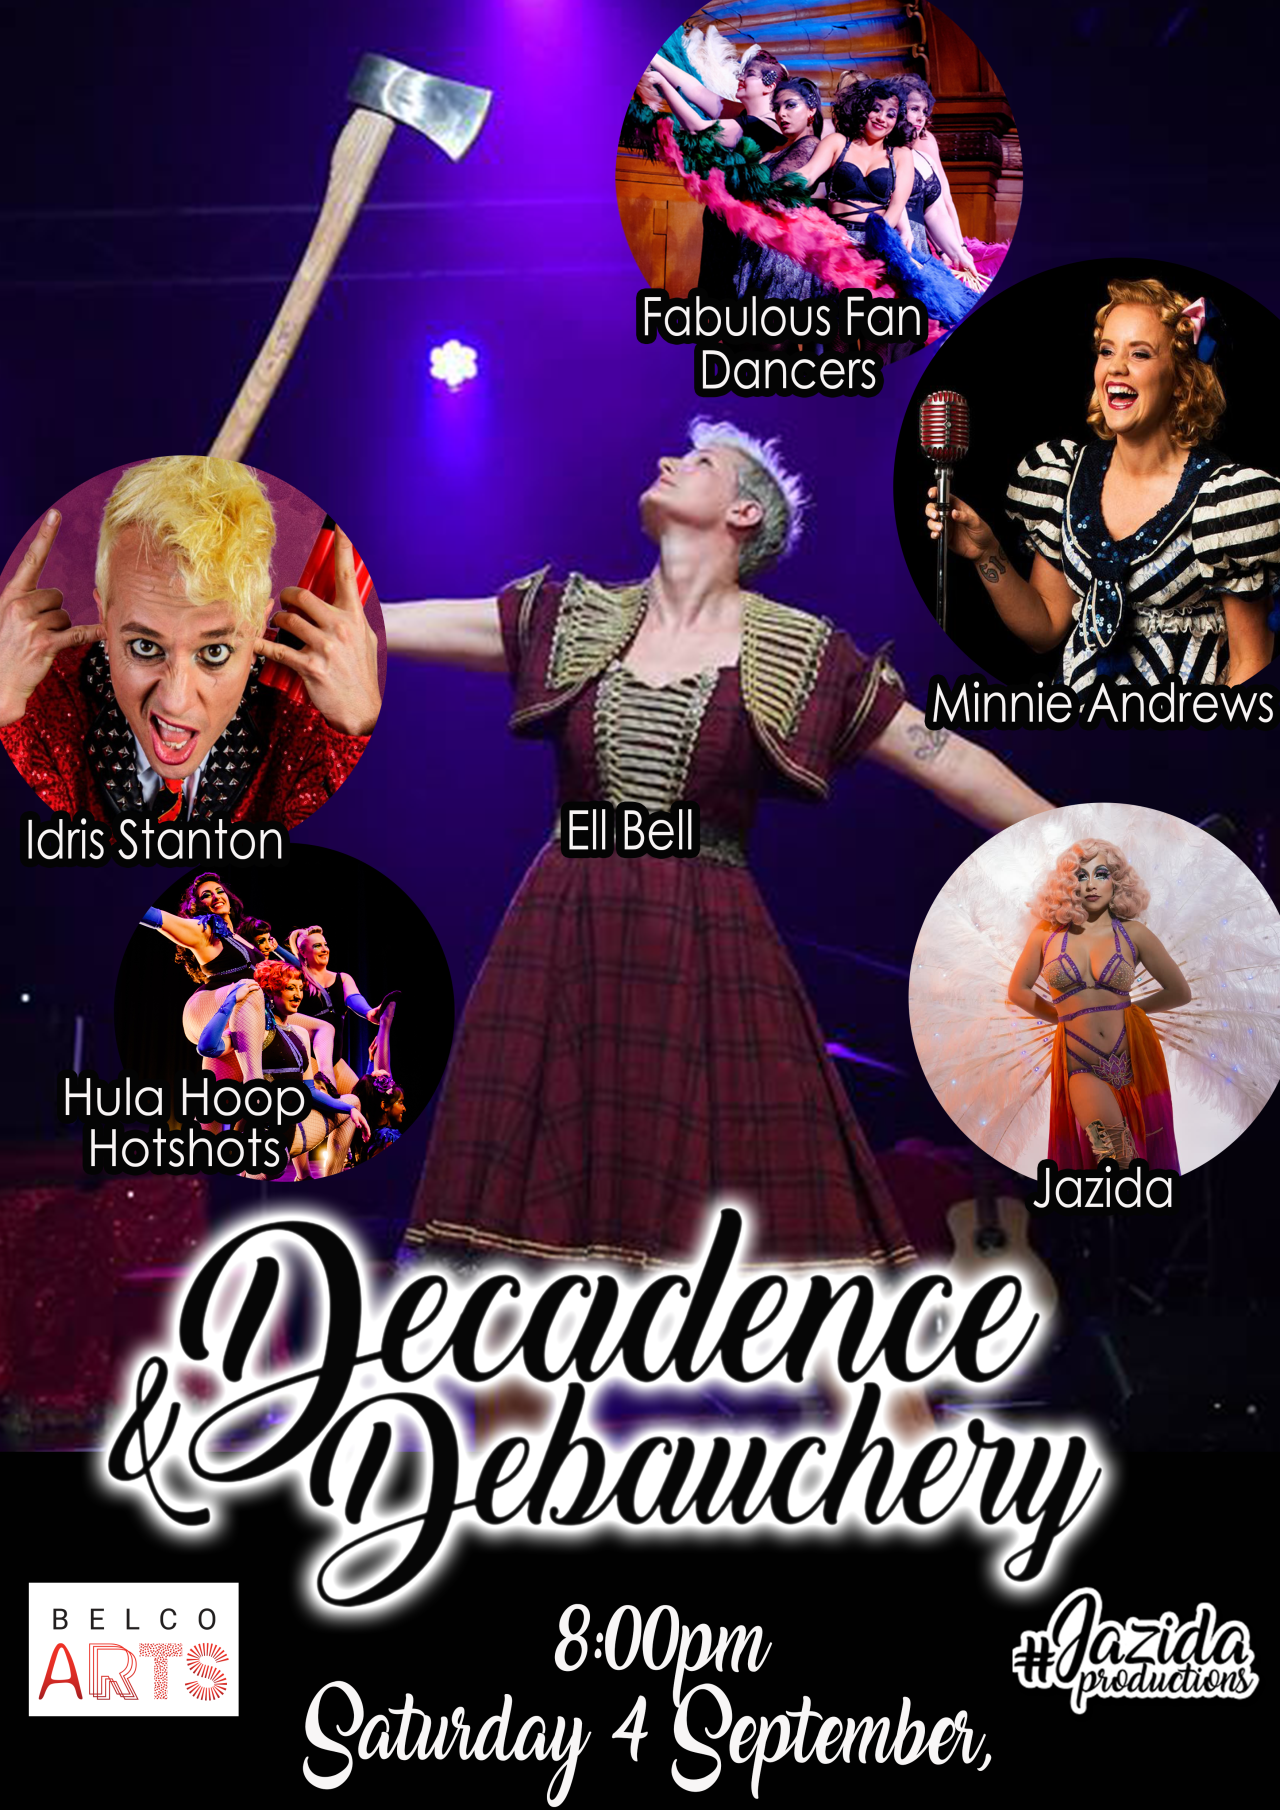 <p>


















Decadence
and Debauchery is back and ready to dazzle</p><p>With a long history of selling our venues to loud acclaim in
Canberra, <i>Decadence and Debauchery </i>is back with the next instalment! Brought
to you by Jazida Productions – winner of Canberra Local Business Awards for
Outstanding Performing Arts, and Adelaide Fringe Festival award for Best Dance –
<i>Decadence and Debauchery</i> is full of top shelf performers to bring you a
decadent night of debaucherous behaviour, sharing vintage striptease, circus
and sideshow, fan dancing, live music, comedy, and so much more!</p><p>September 4<sup>th</sup> will see the <i>Decadence and
Debauchery </i>cast return to Belconnen Arts Centre in the cultural centre of
North Canberra on the banks of Lake Ginninderra. The arts centre expanded in
2020 to include purpose-built spaces for development and performance of dance,
theatre, circus and music in order to welcome broader creative communities to
showcase their artistic practices in a professional environment.</p><p>Kicking off at 8pm on Saturday September 4<sup>th</sup>,
audiences can expect a night packed full of comedy, live music, sideshow acts, fan
dancing, and the art of tease all under the same roof with absolute firecracker
co-MC’s – Idris Stanton (Best Circus at Adelaide and Melbourne Fringe
festivals) and Ell Bell (Co-Director of Gluttony and Creative Producer at Highwire Entertainment)
– to feature alongside soulful songstress Minnie Andrews, Canberra performer
powerhouse Jazida, and local performers; Fabulous Fan Dancers, Flazeda
Burlesque Babes, Hula Hoop Hotshots. <br/>
More artists are yet to be announced.</p><p><b>To book tickets to Decadence and Debauchery September,
please visit:<br/>
</b><a href="http://www.belcoarts.com.au/">www.belcoarts.com.au/ </a><br/>
<b>For more information about workshops and future shows, please visit:<br/>
</b><a href="http://jazidaproductions.com">jazidaproductions.com</a> or contact jazidaproductions@gmail.com</p>